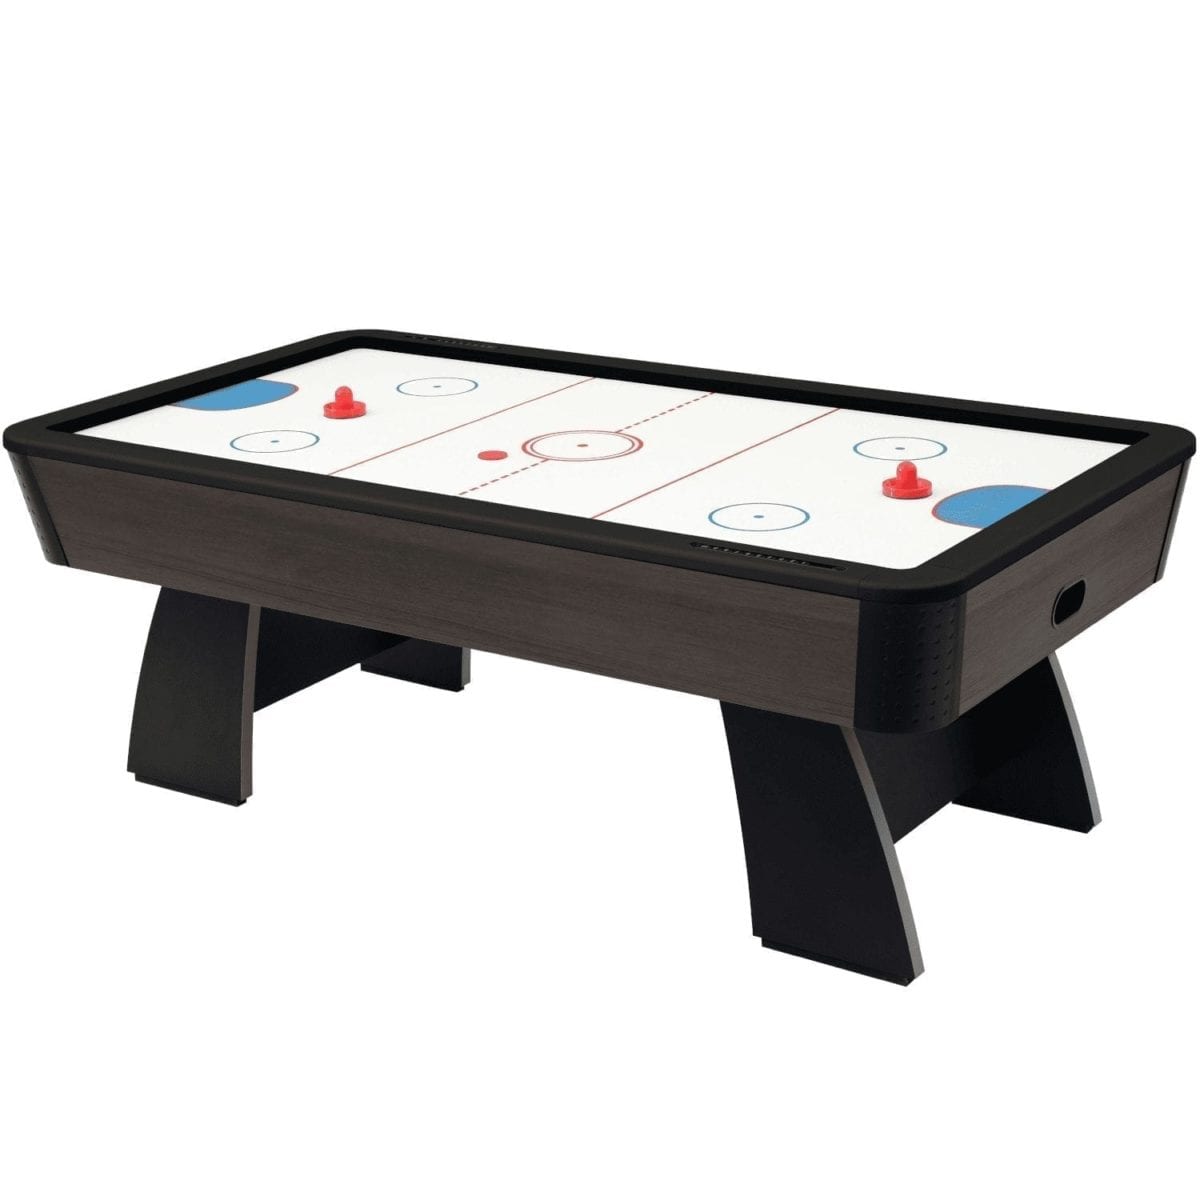 Antique Stone Air Hockey Table, Game Table